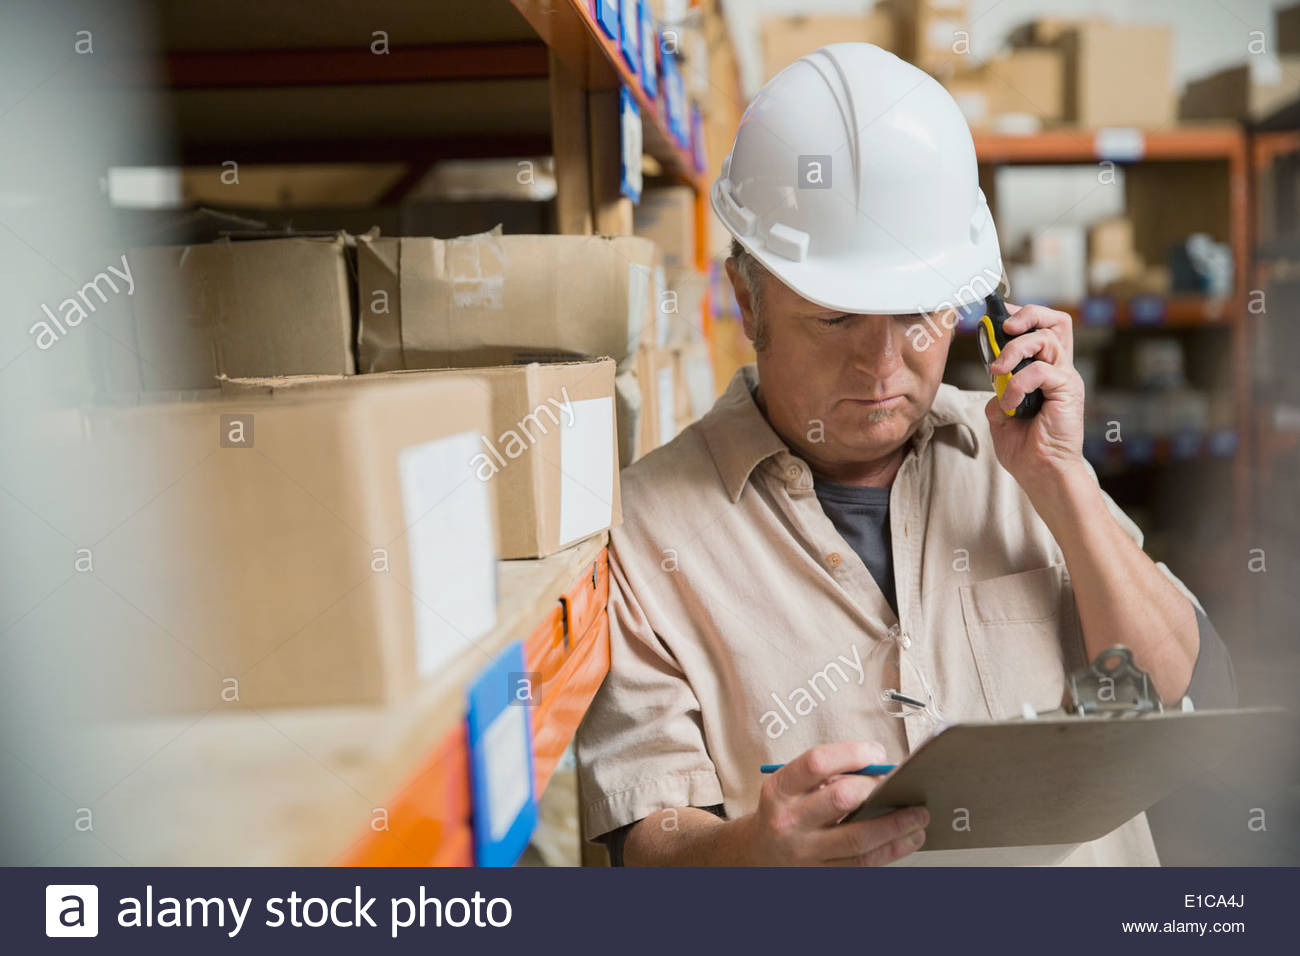 Worker with clipboard in warehouse Stock Photo